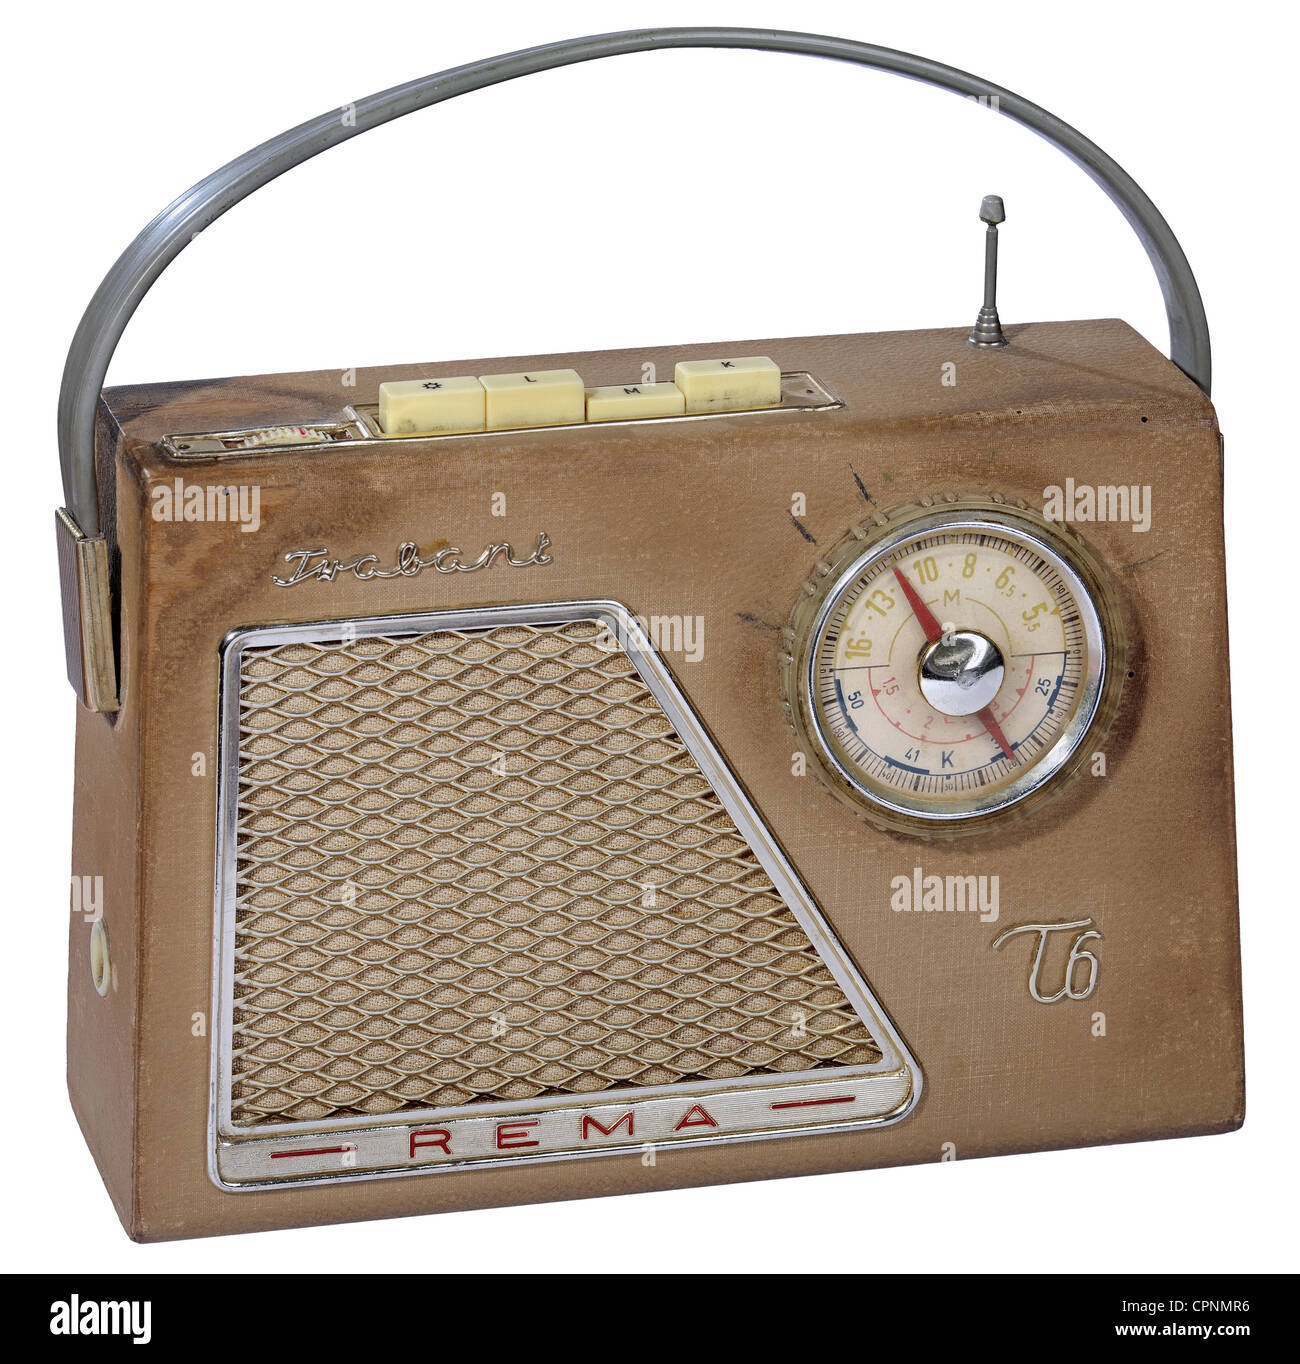 broadcast, radio, portable radio Rema "Trabant T6", device is weighing  1.8kg, made by: Rema, Stollberg, Saxony, East-Germany, 1961,  Additional-Rights-Clearences-Not Available Stock Photo - Alamy